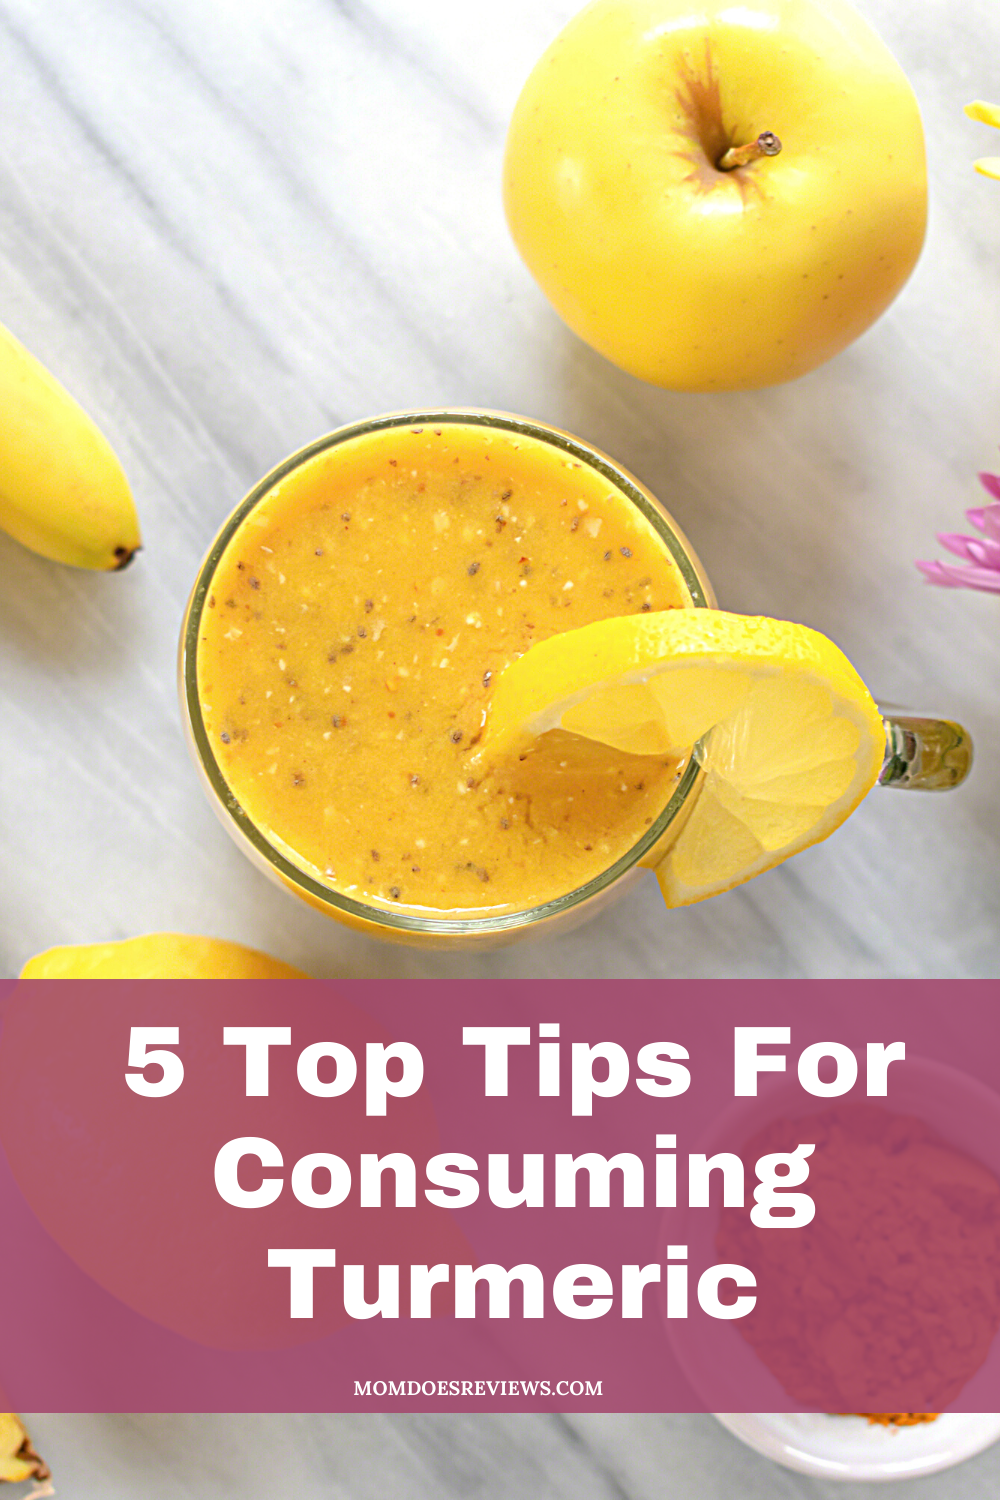 5 Top Tips For Consuming Turmeric